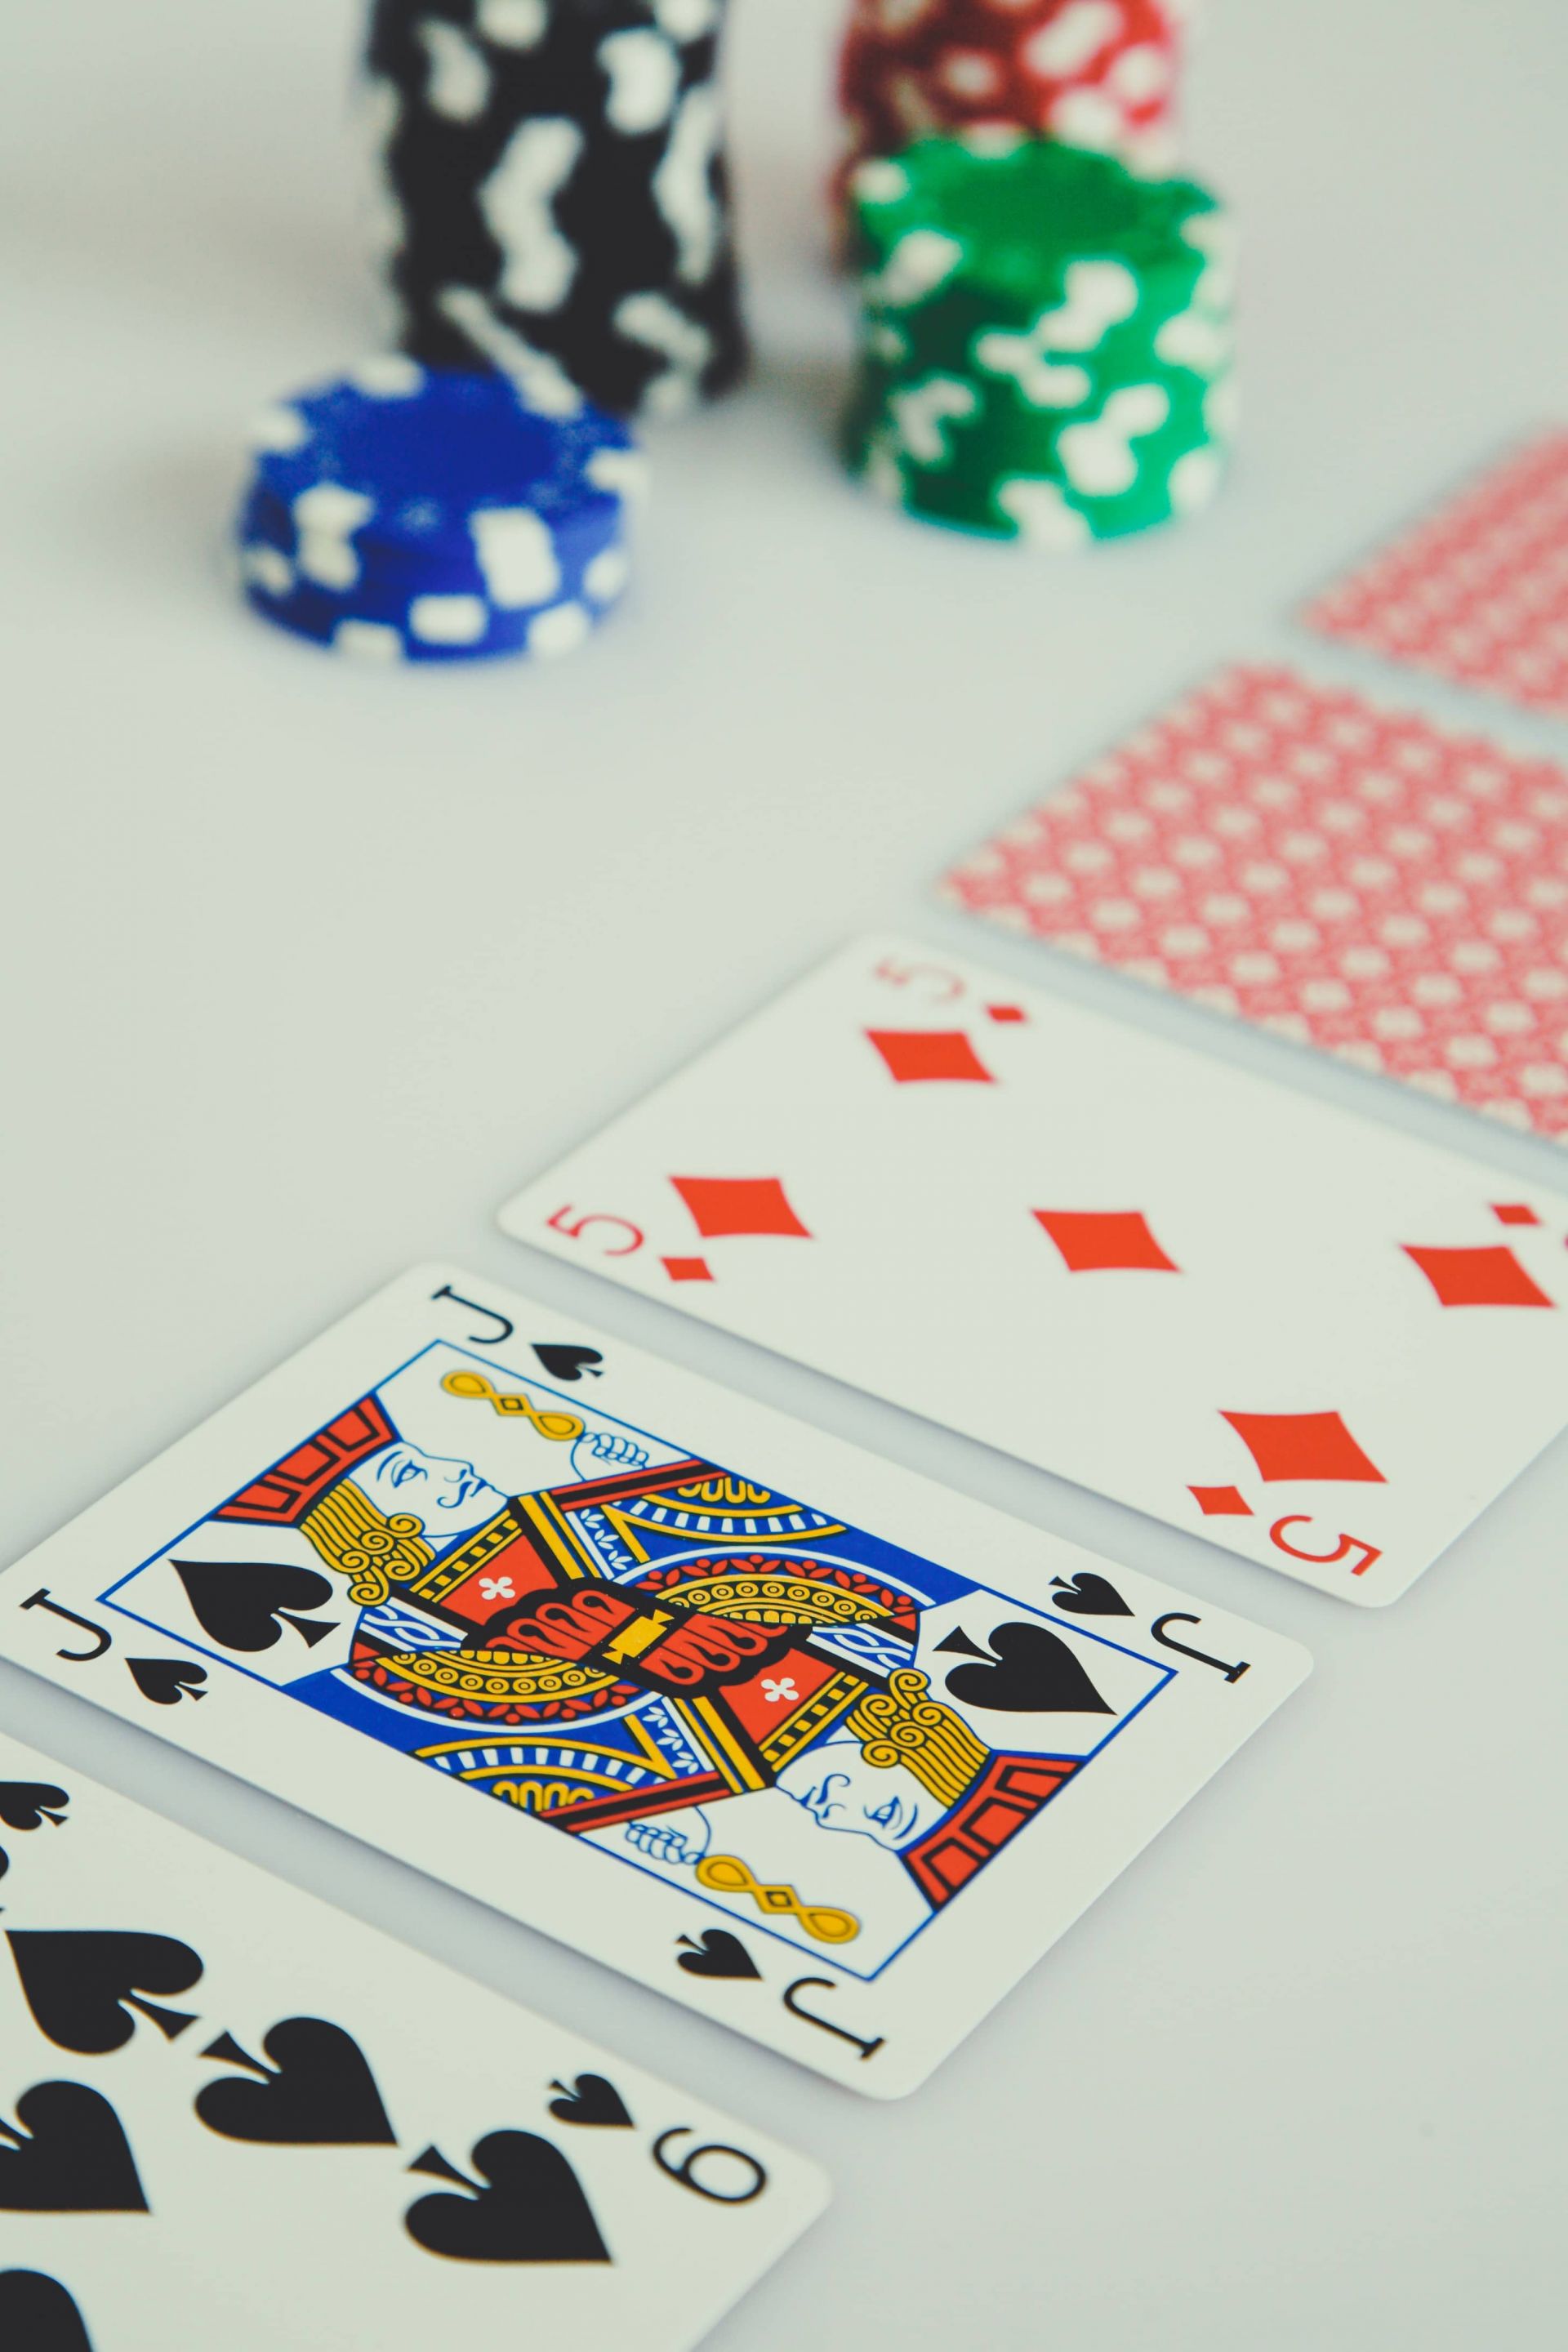 How You Can Play Teen patti Today and Win